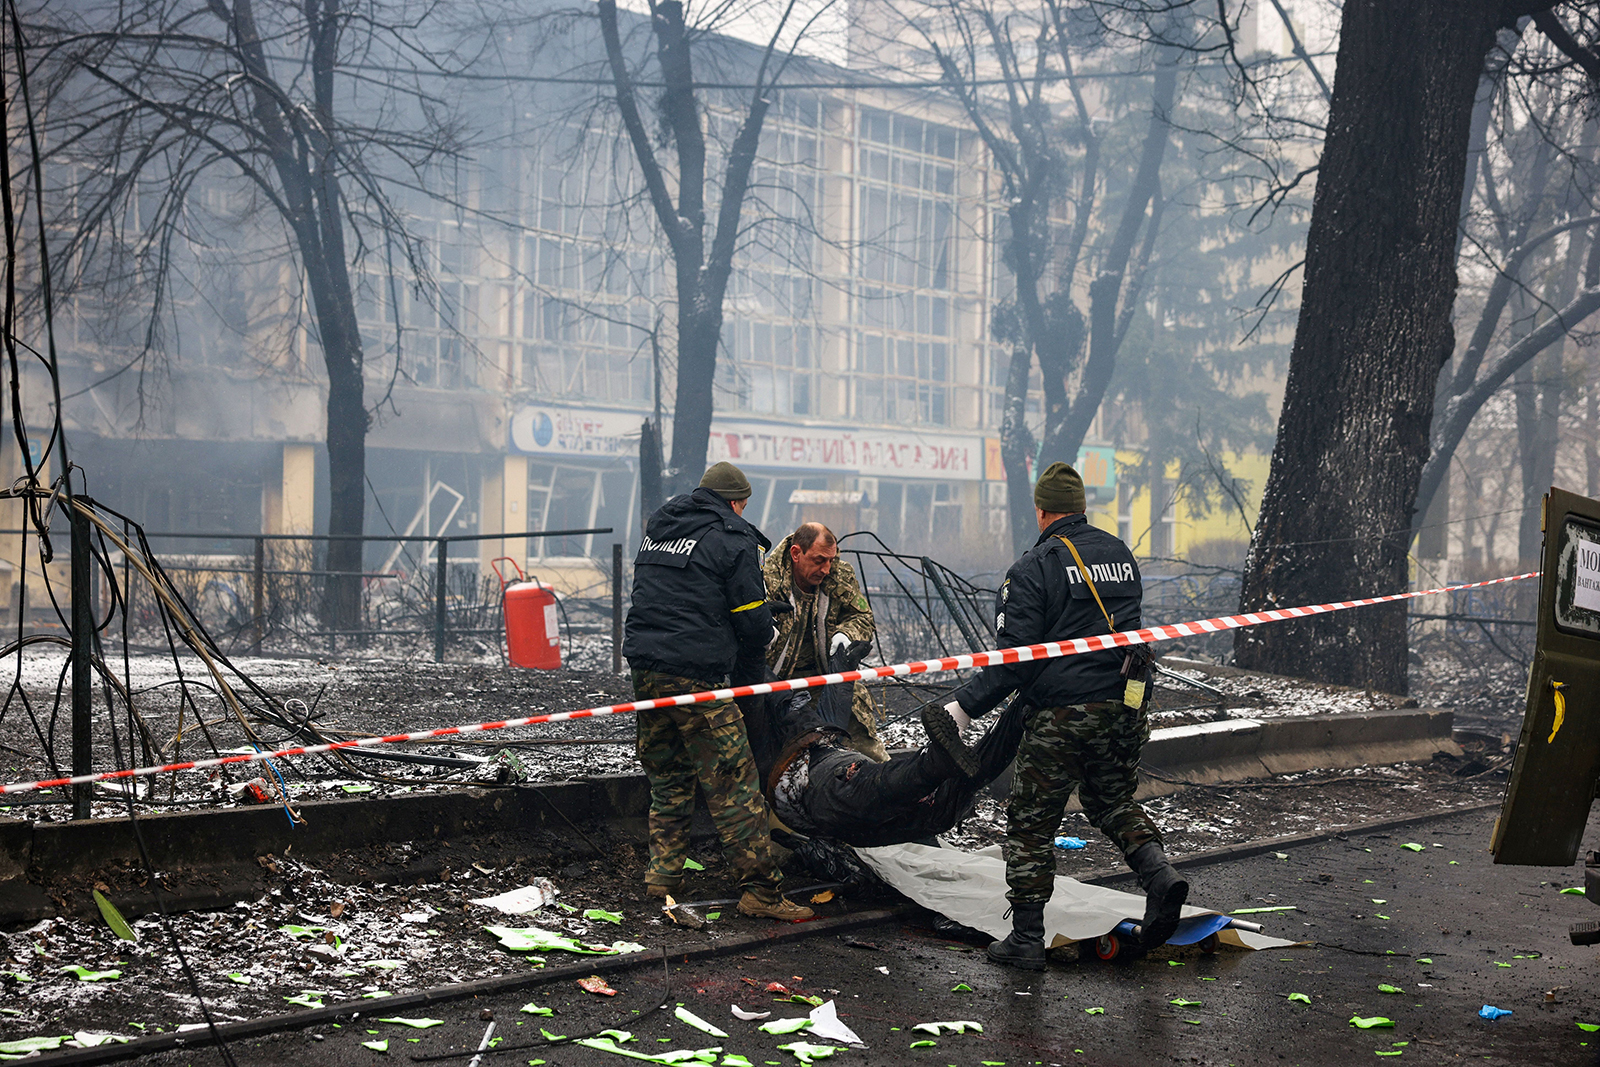 Police officers remove the body of a passerby on March 2 after an airstrike that hit Kyiv's main television tower in Kyiv, Ukraine, the previous day.